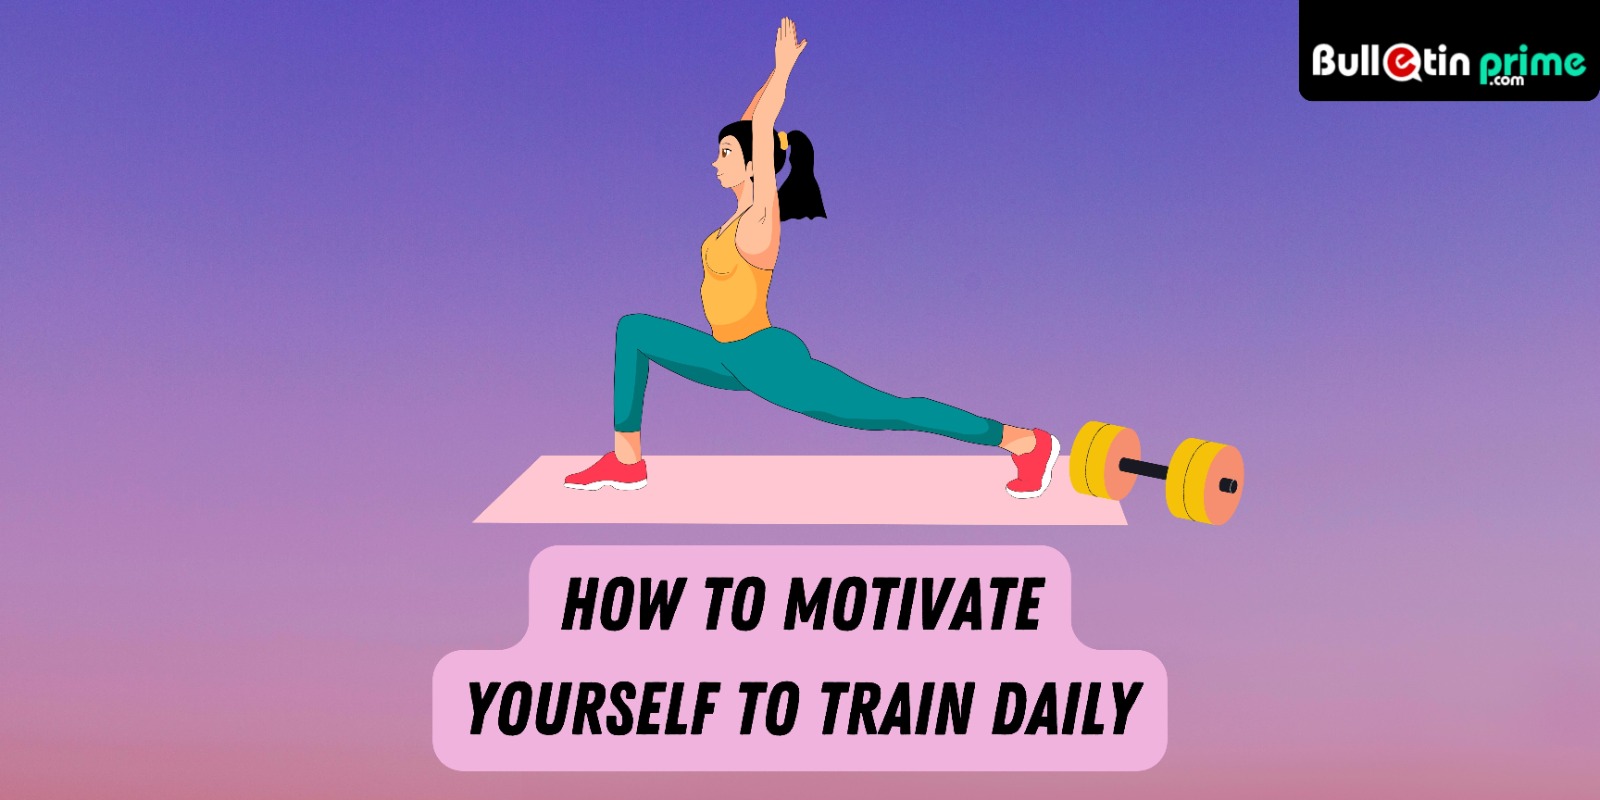 Motivate Yourself To Train Daily